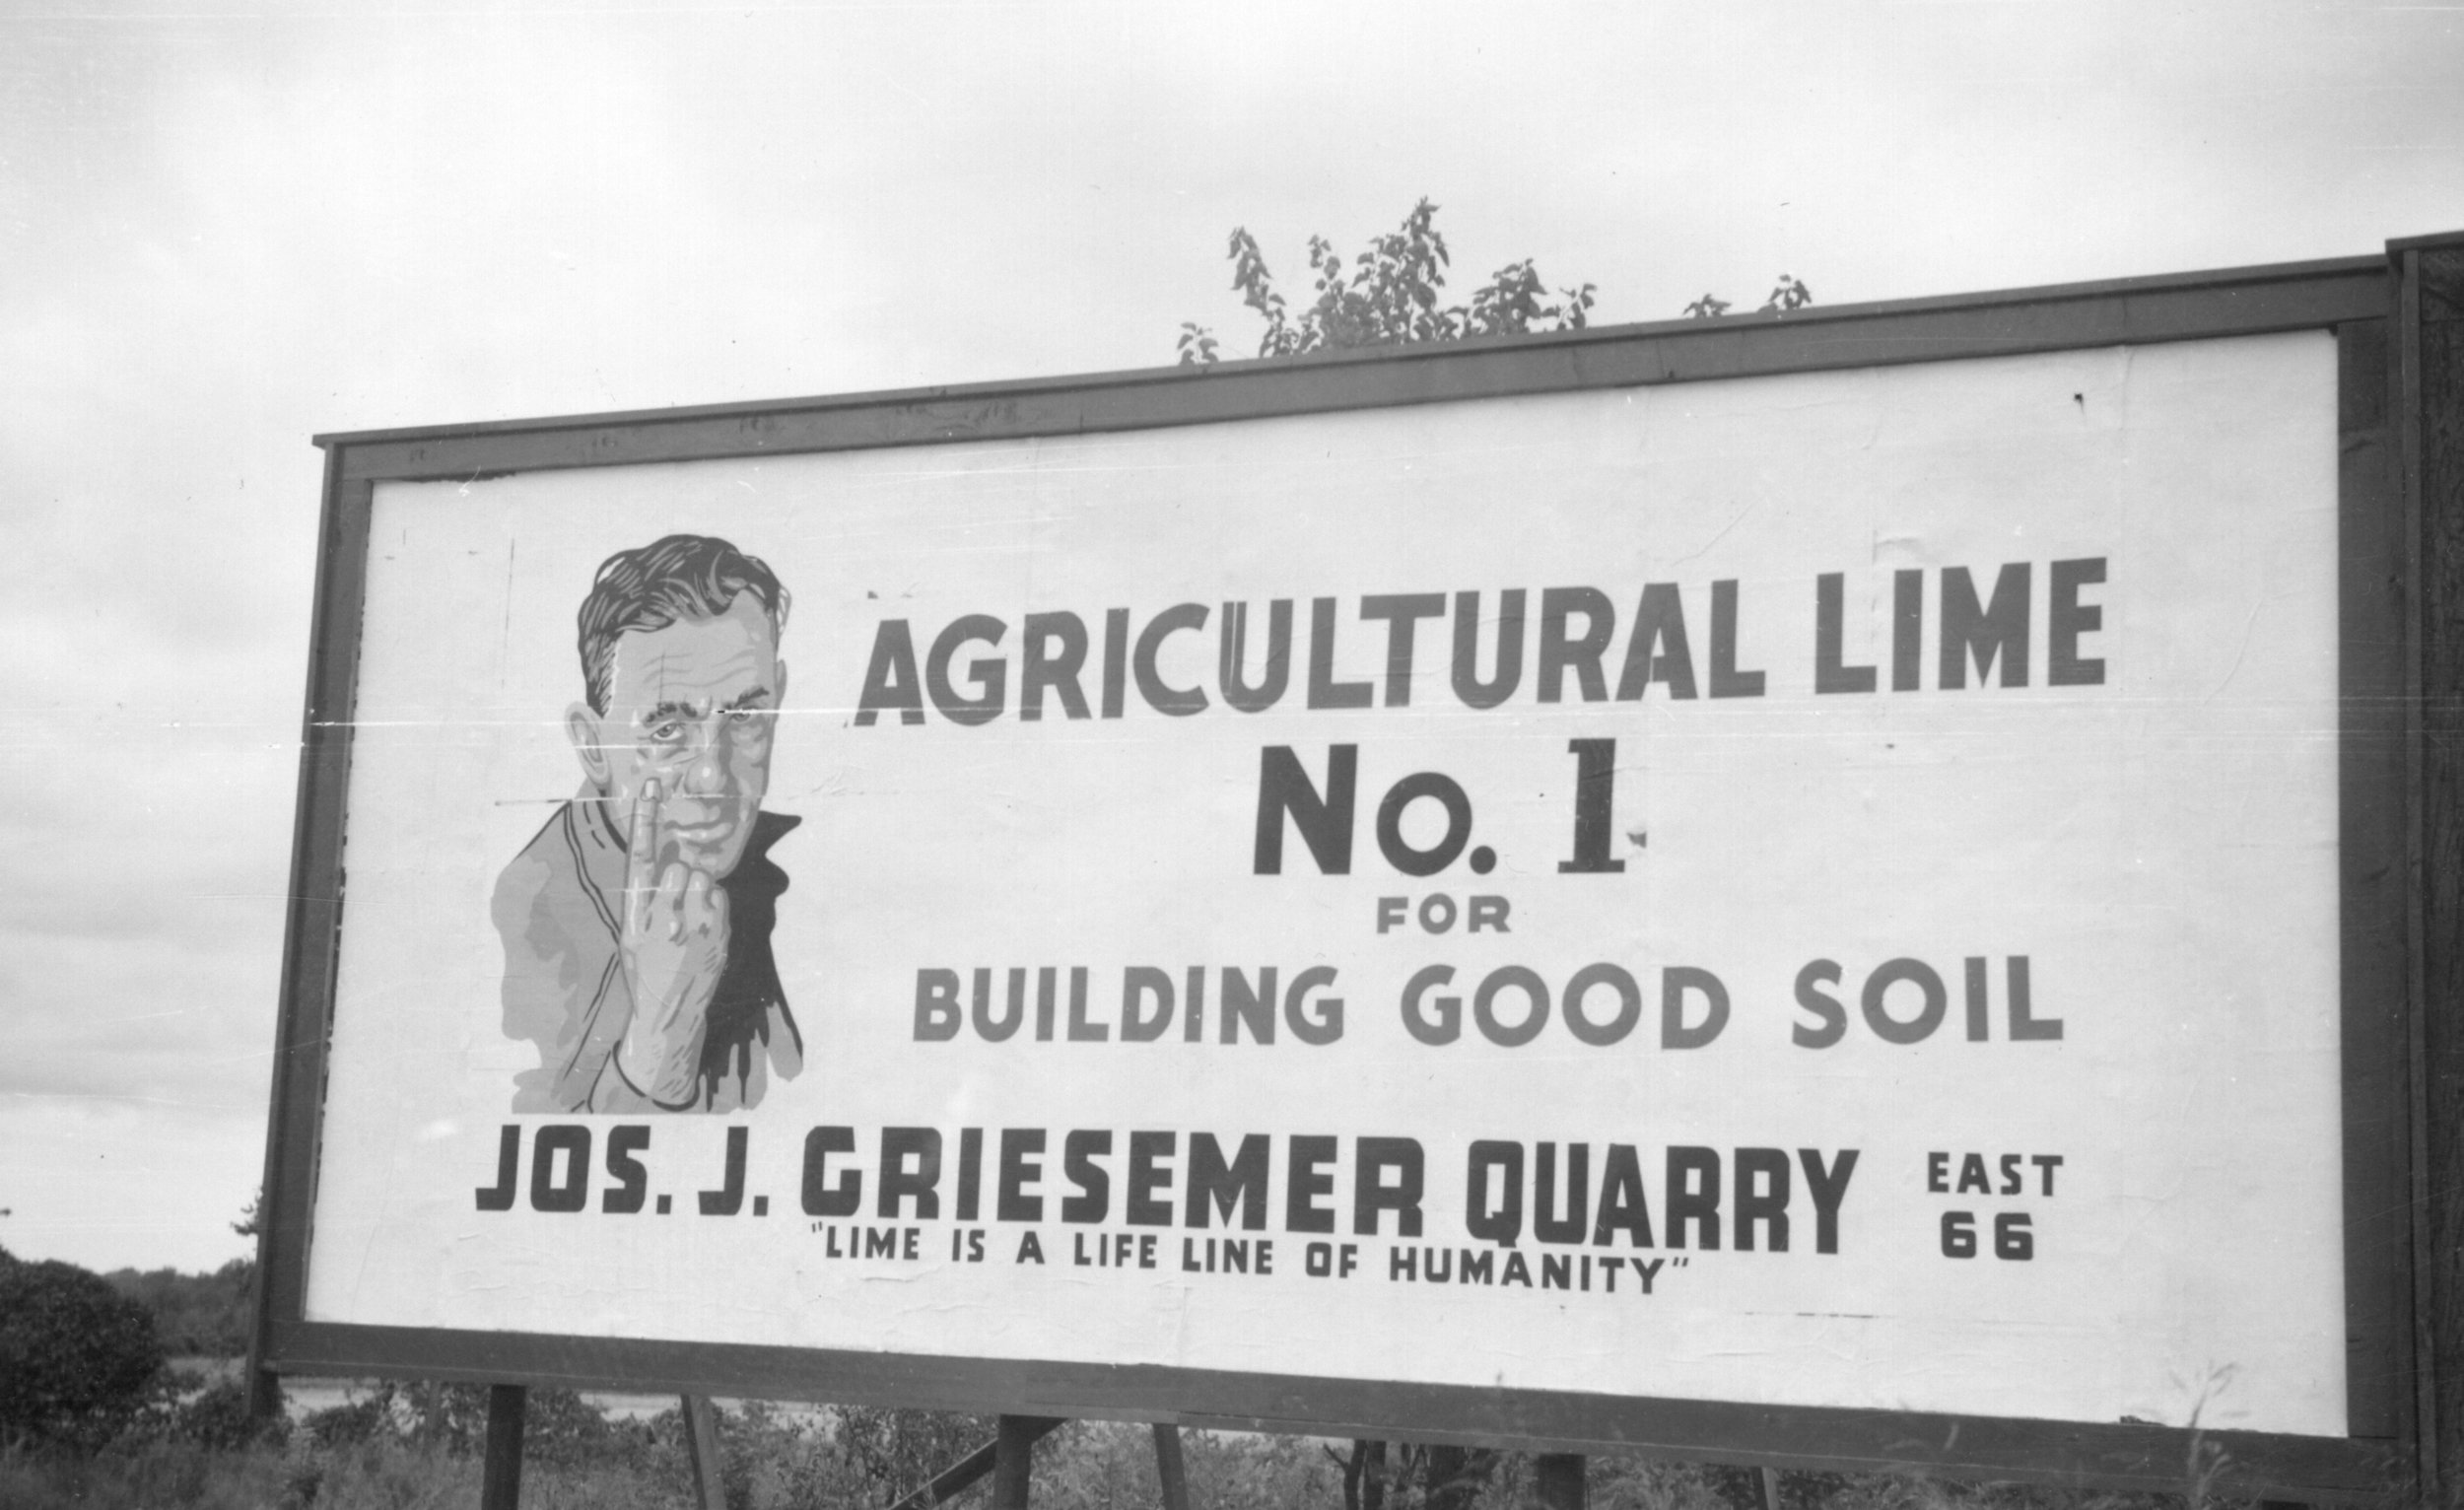  In 1946, the Joseph J. Griesemer Quarry opened northeast of Springfield, Missouri on Historic Route 66 and the Frisco Railroad.  